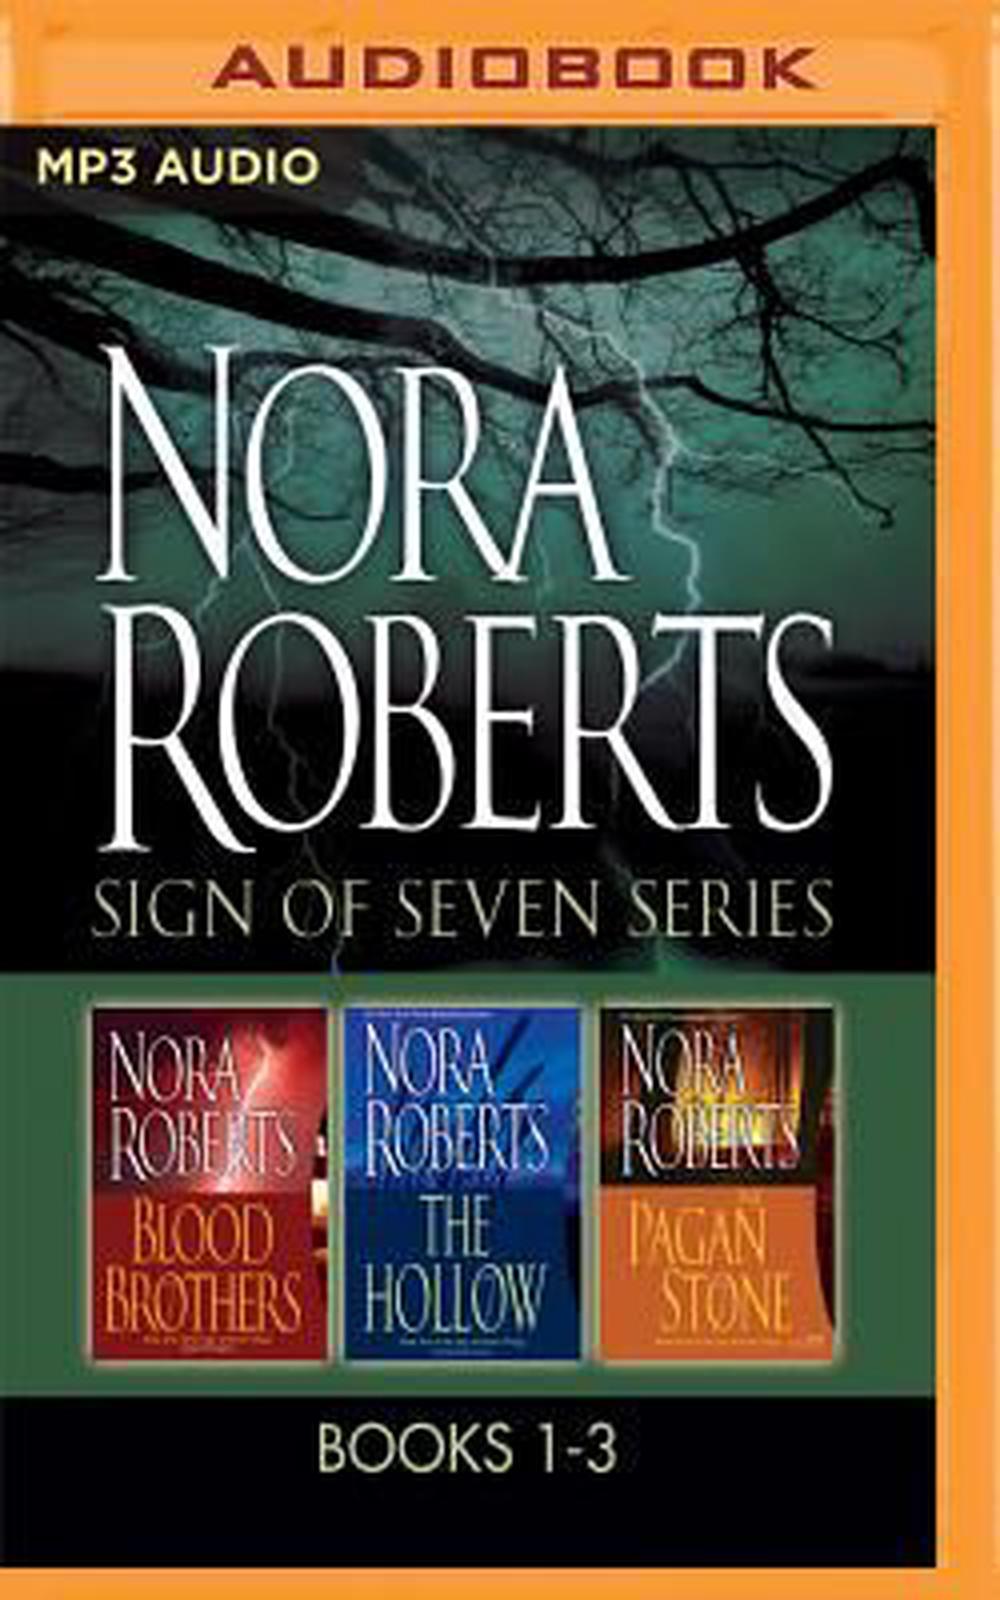 nora roberts blood brothers book 1